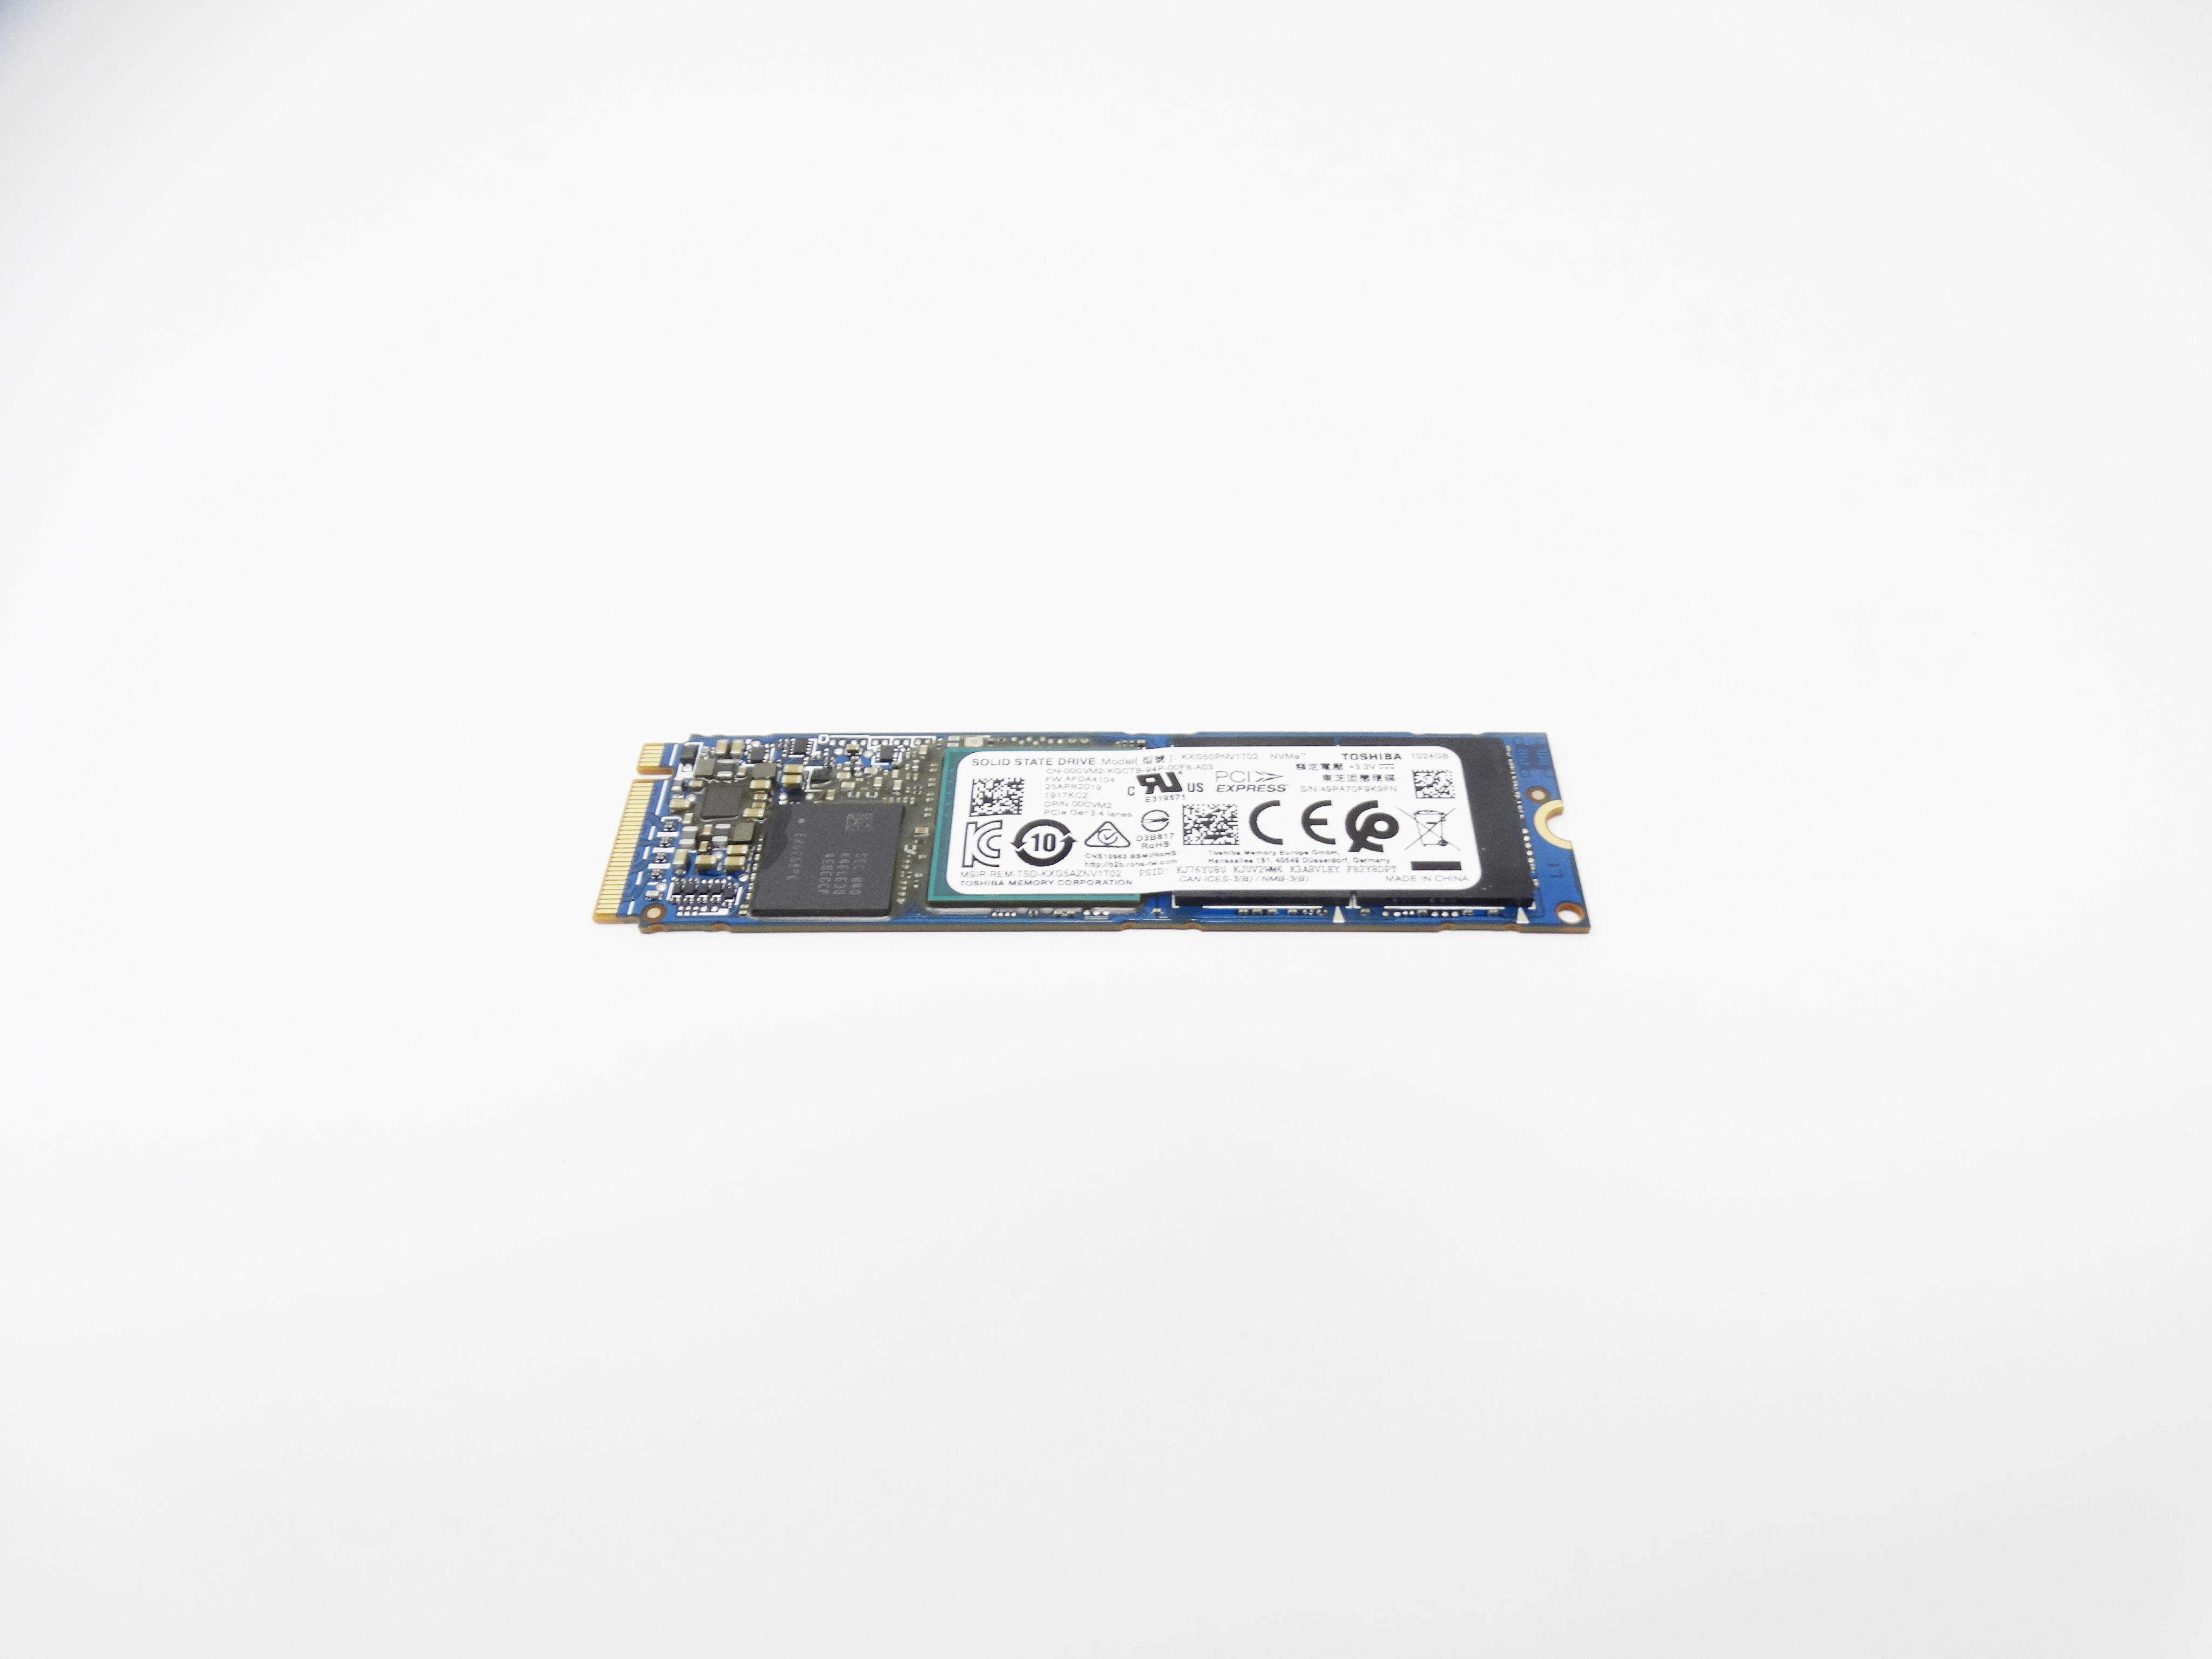 Dell 1TB NVMe PCIe 3.0 x4  M.2 2280 SSD Solid State Drive (KXG50PNV1T02)